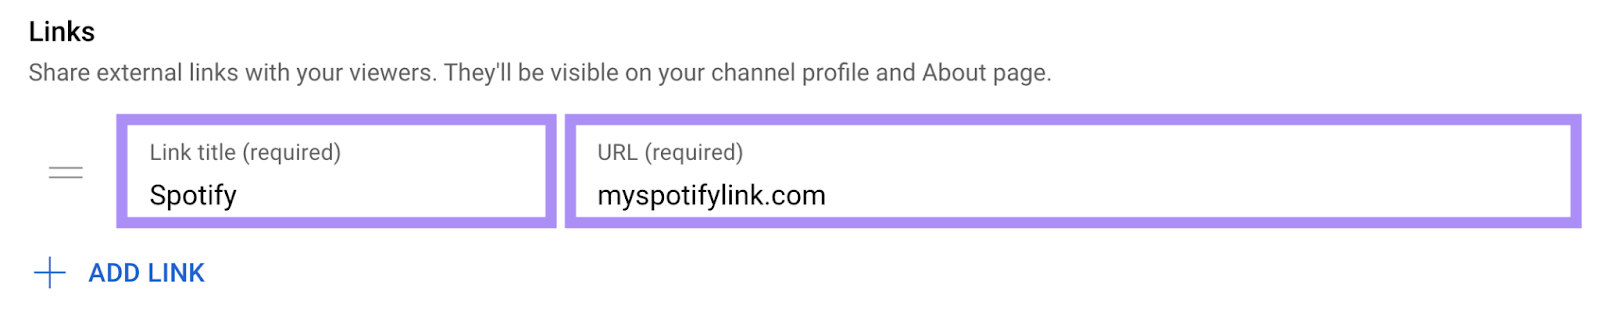 "Spotify" and "myspotifylink.com" entered nether  "Links" conception  successful  “YouTube Studio